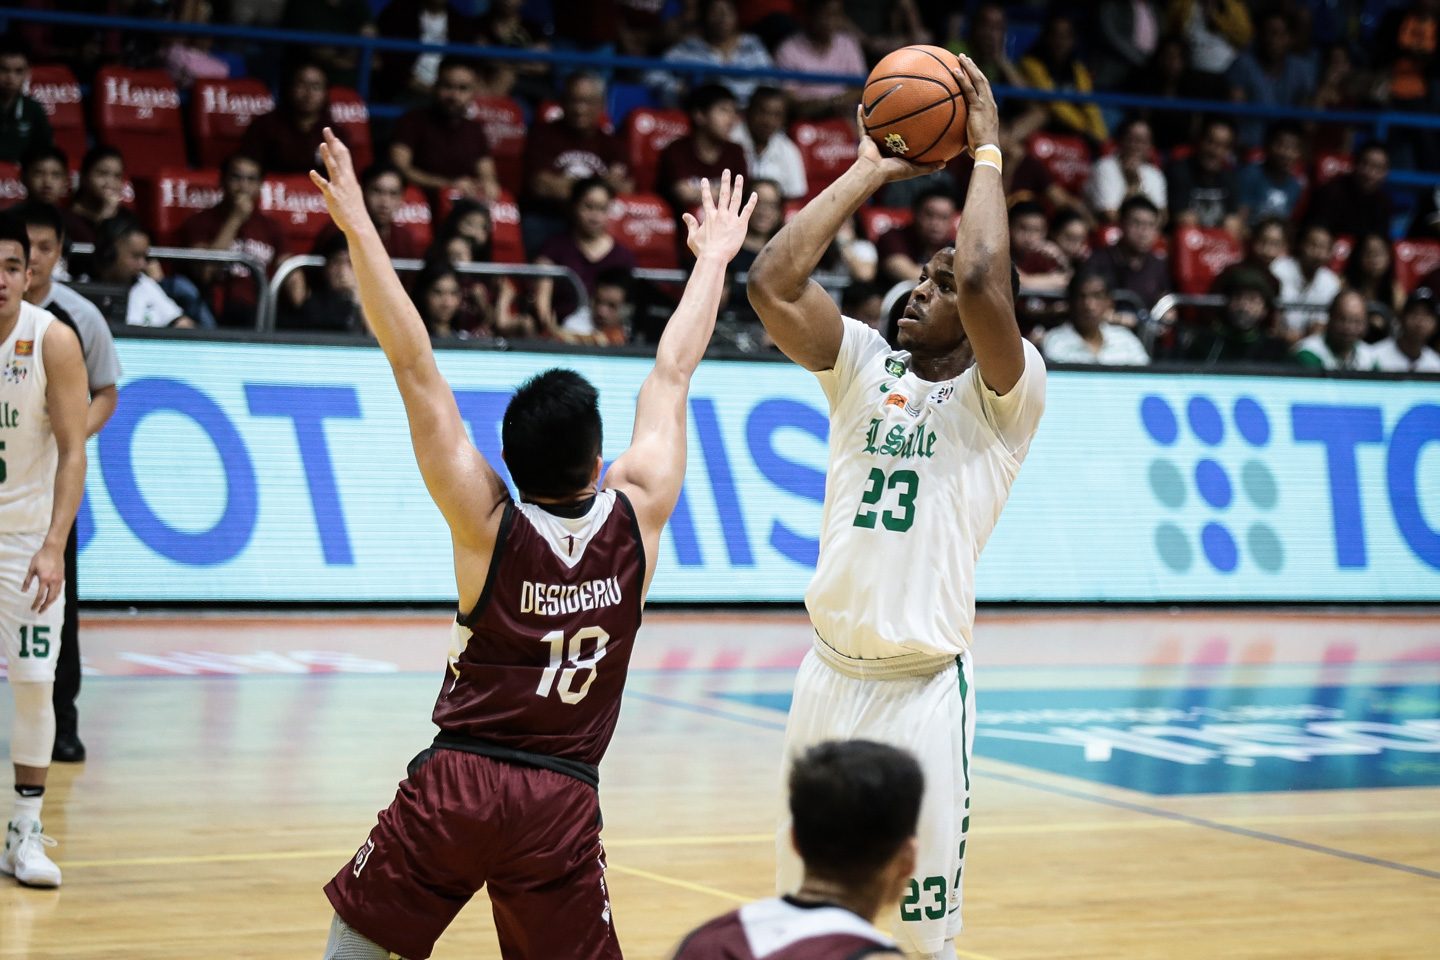 In redemption win, 6-foot-7 small forward Mbala shuts down Desiderio